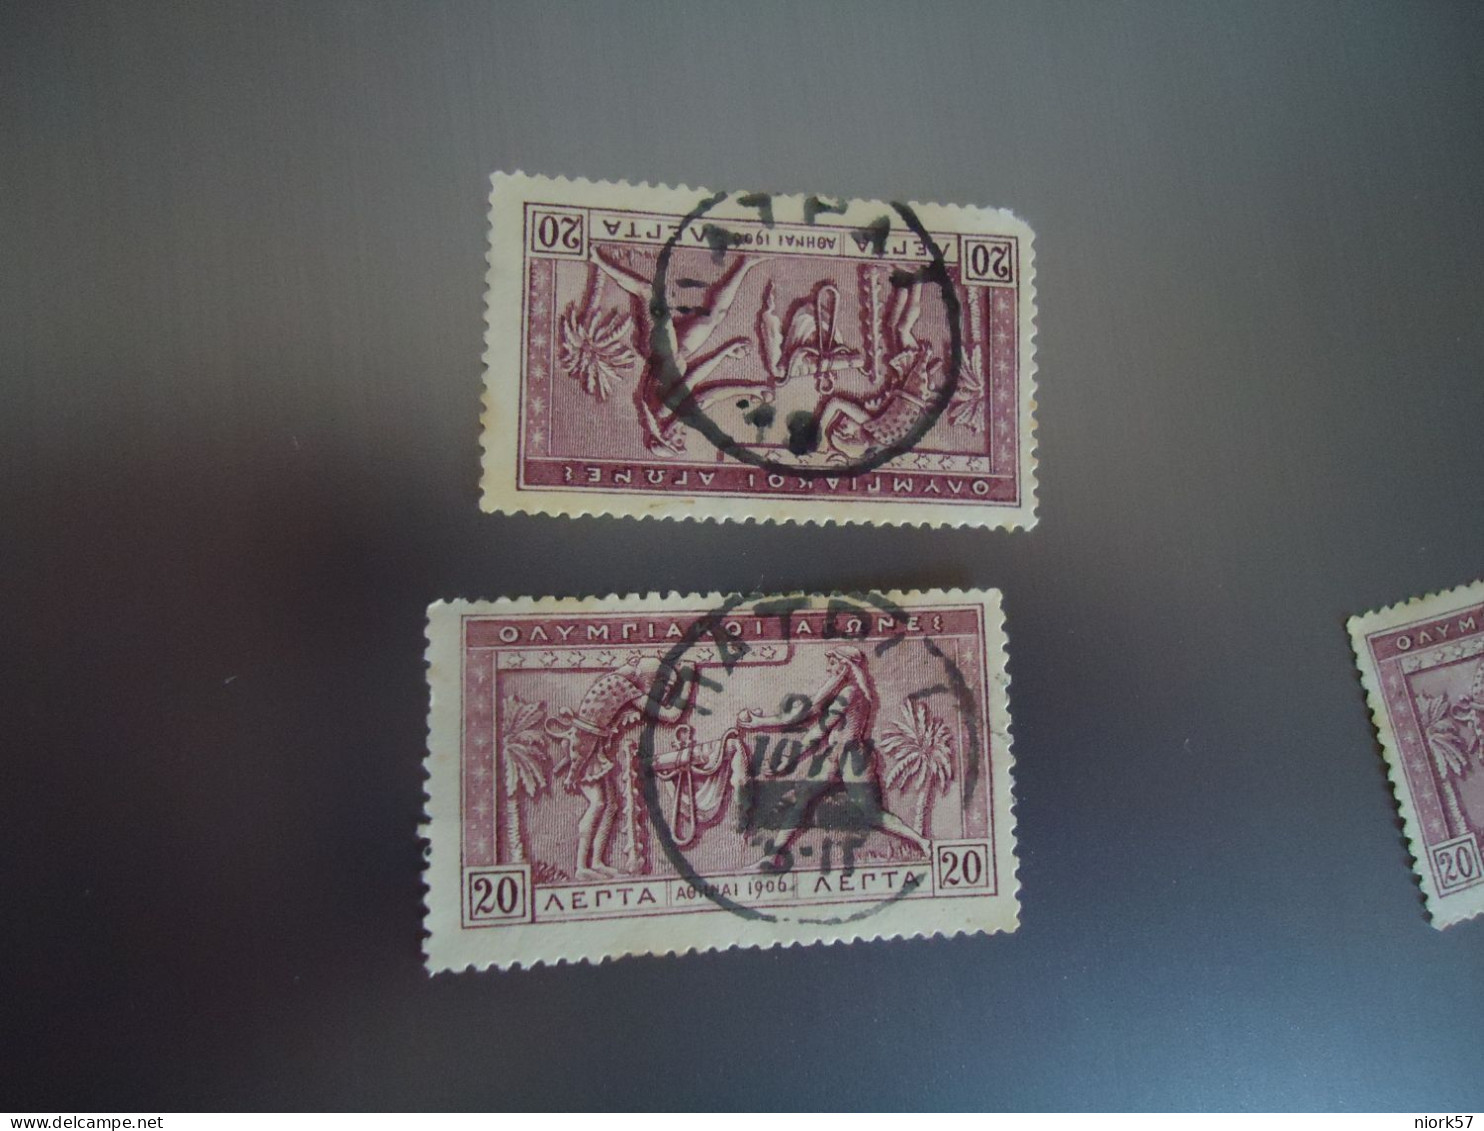 GREECE USED STAMPS  2 OLYMPIC GAMES POSTMARK  PATRAI  ΠΑΤΡΑ - Marcophilie - EMA (Empreintes Machines)